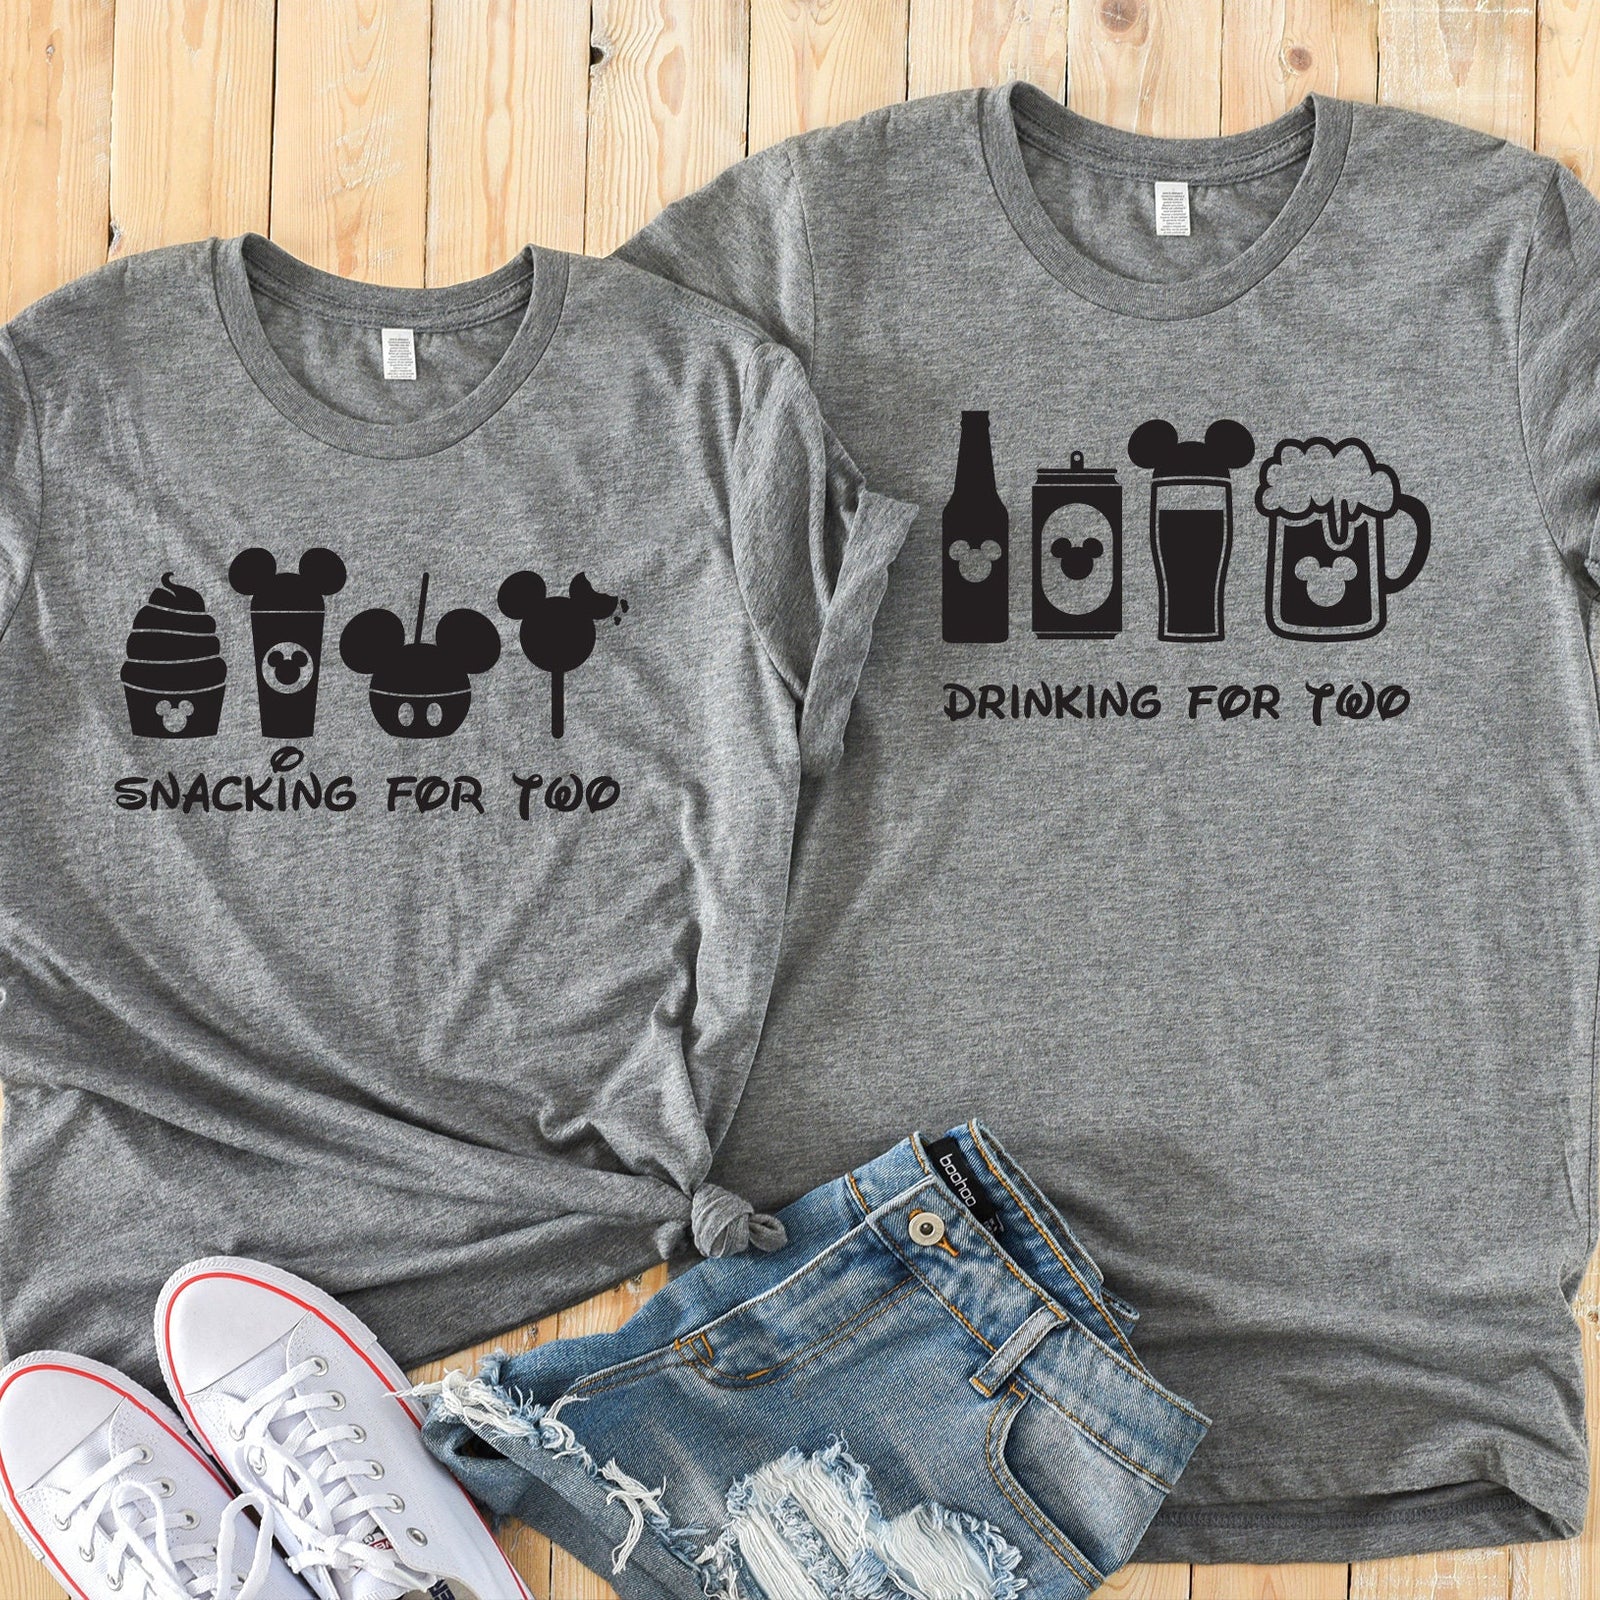 Snacking for Two - Drinking for Two - Funny Disney Couples Shirt - Matching Disney Shirts - Pregnancy Announcement Disney Shirt